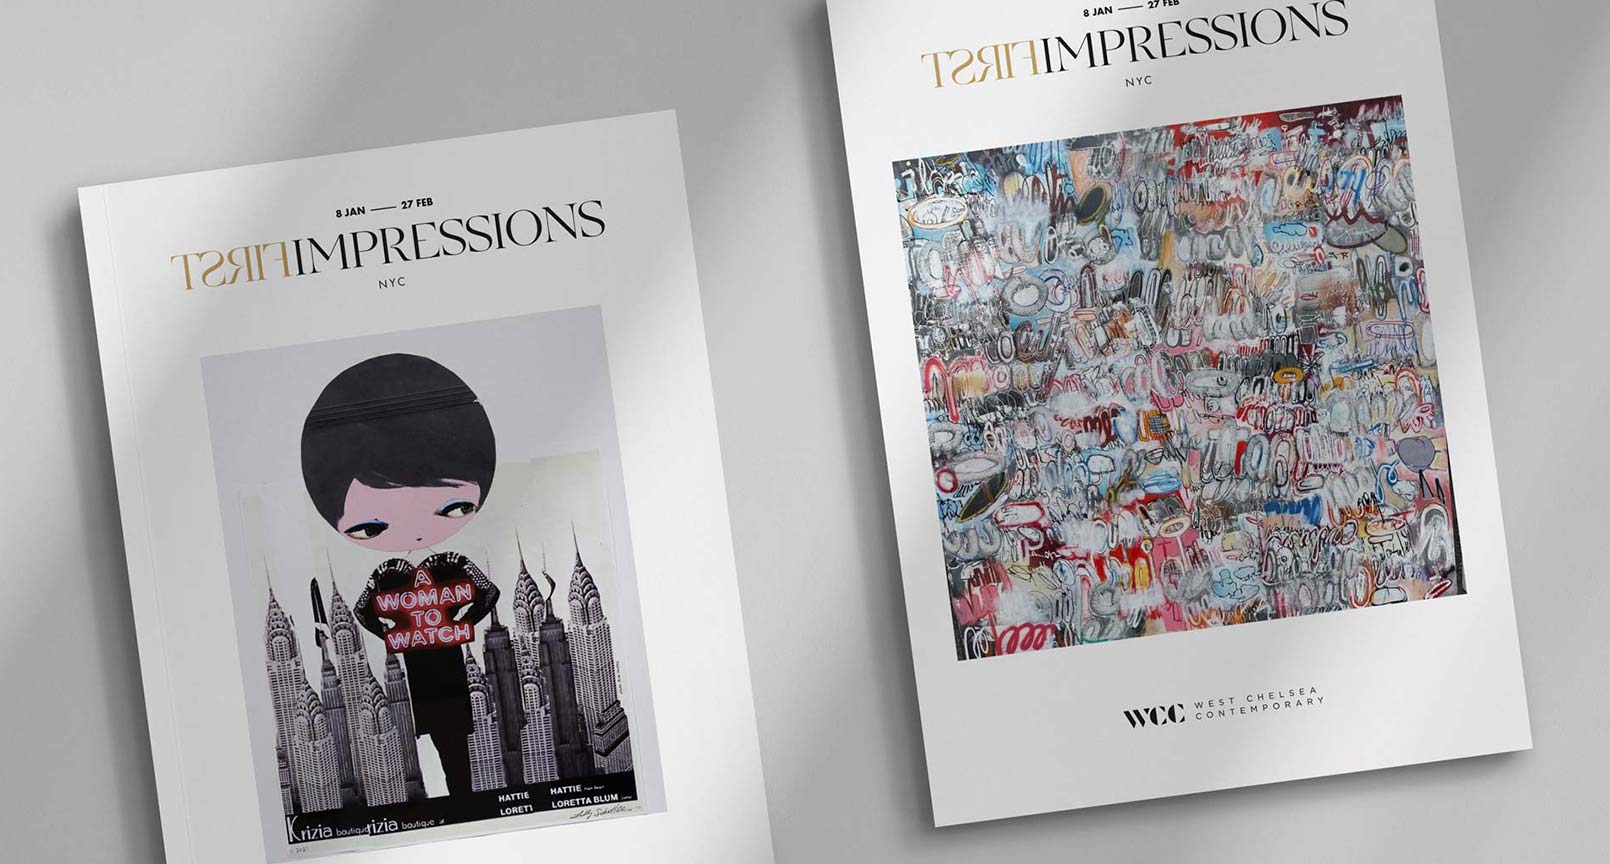 Light mode graphic design of the show program for art gallery West Chelsea Contemporary's "First Impressions" art show